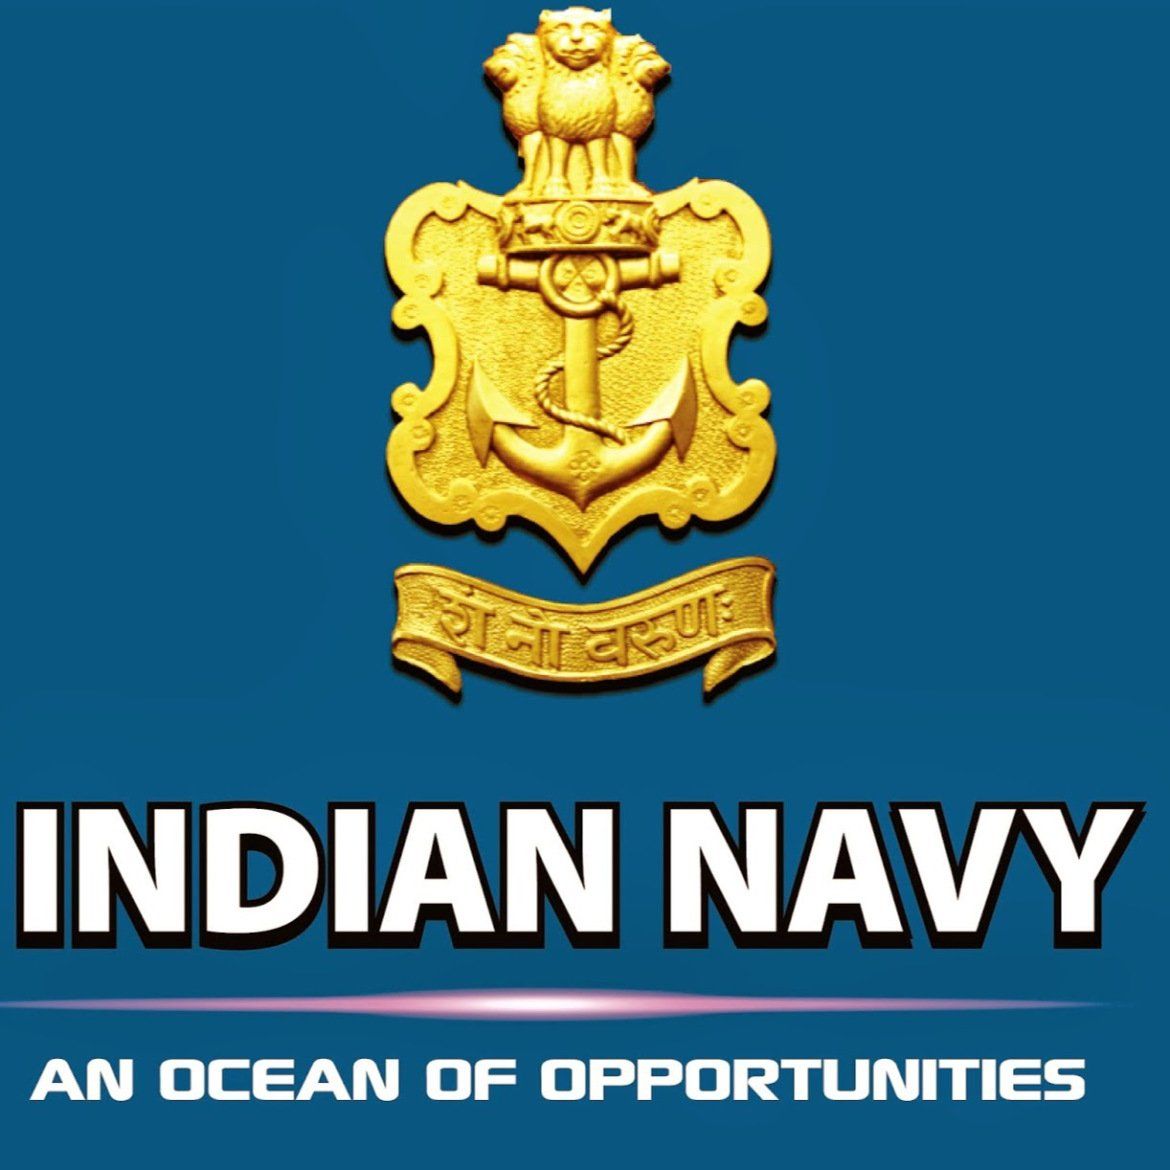 Wallpaper With Name Of Indian Navy